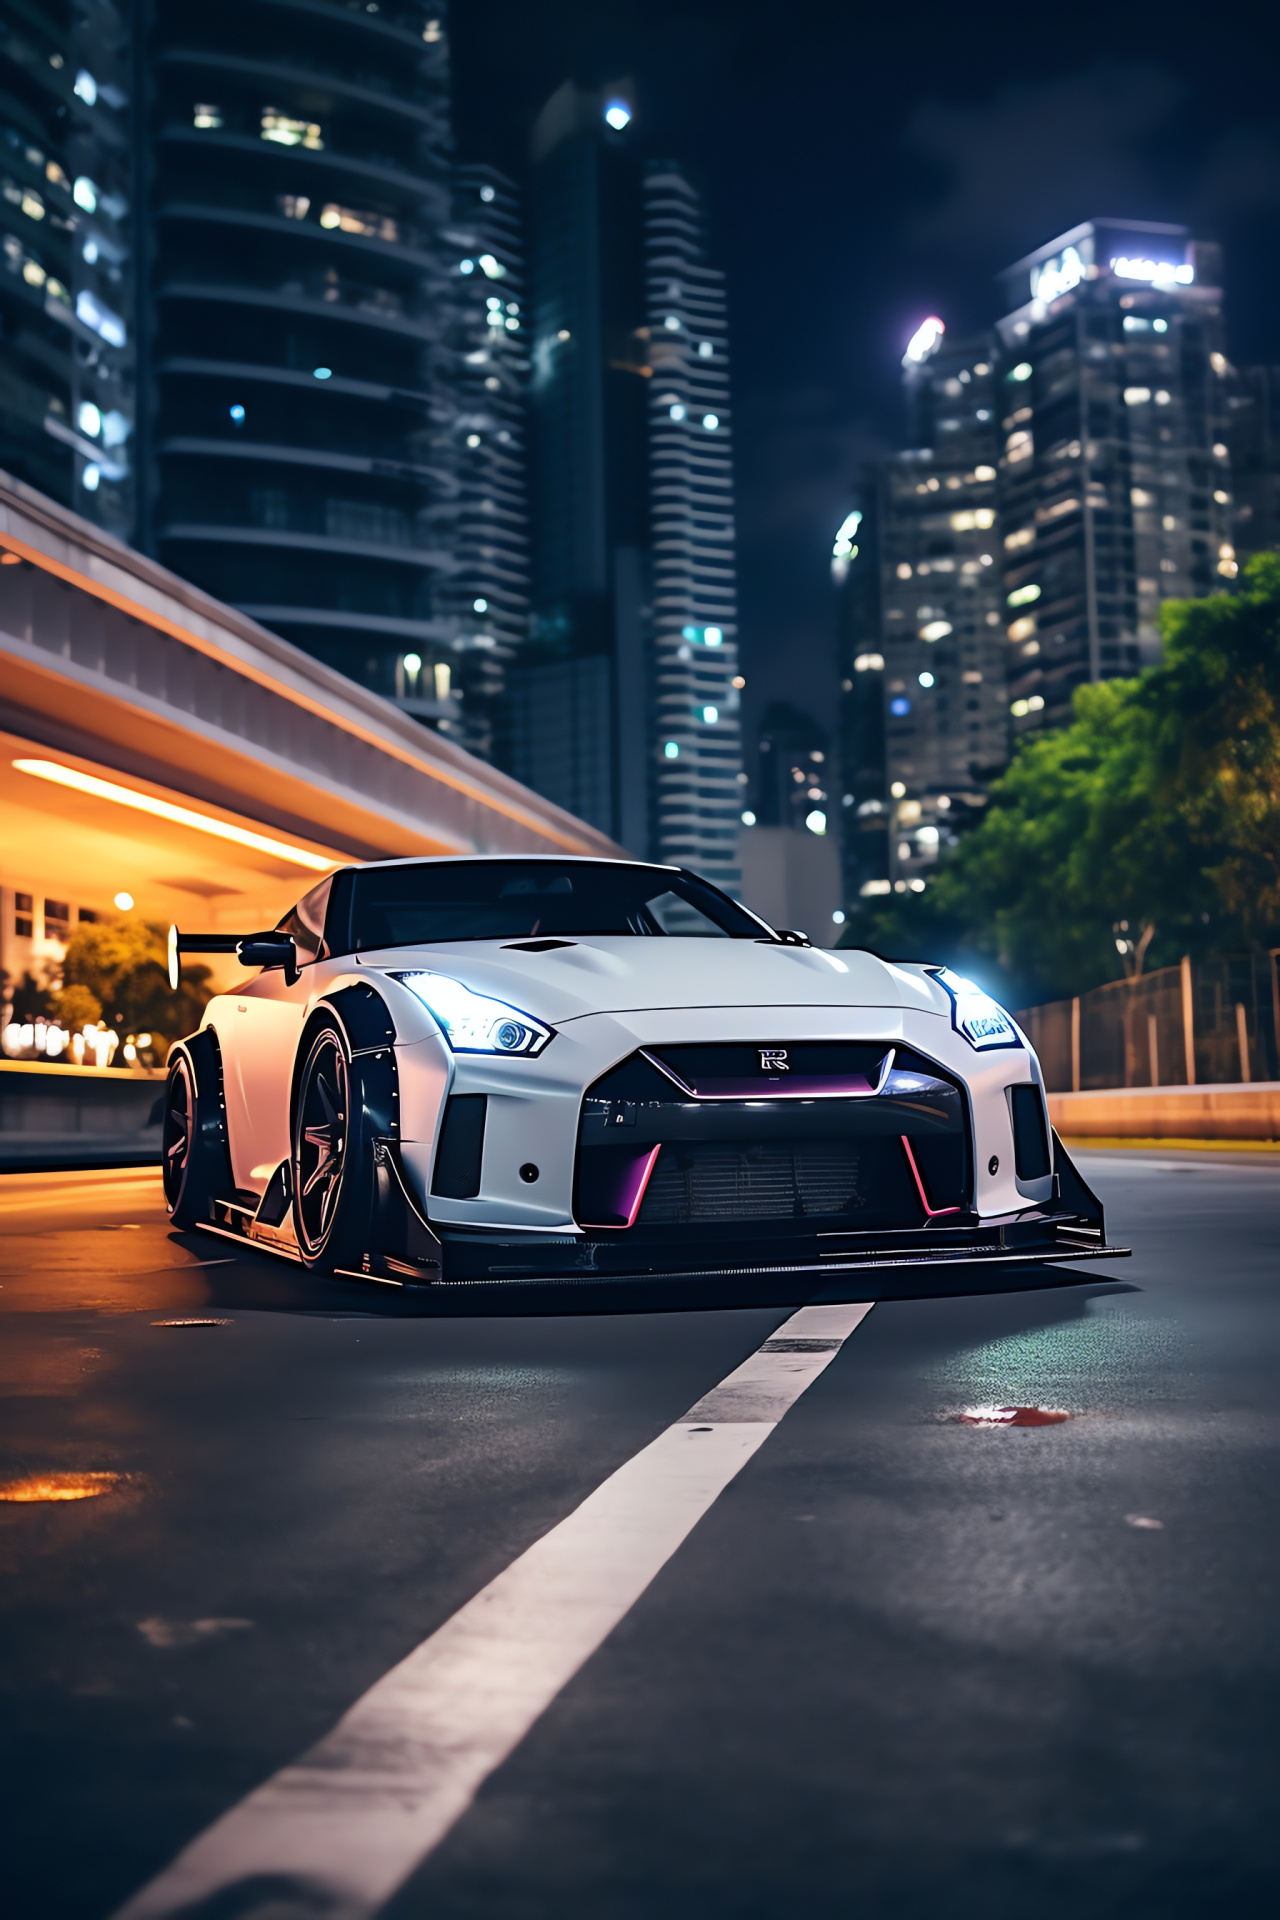 Rocket Bunny Nissan GT-R, Modified vehicle, Night cityscape backdrop, Wide-body sports car, High performance tuning, HD Phone Wallpaper